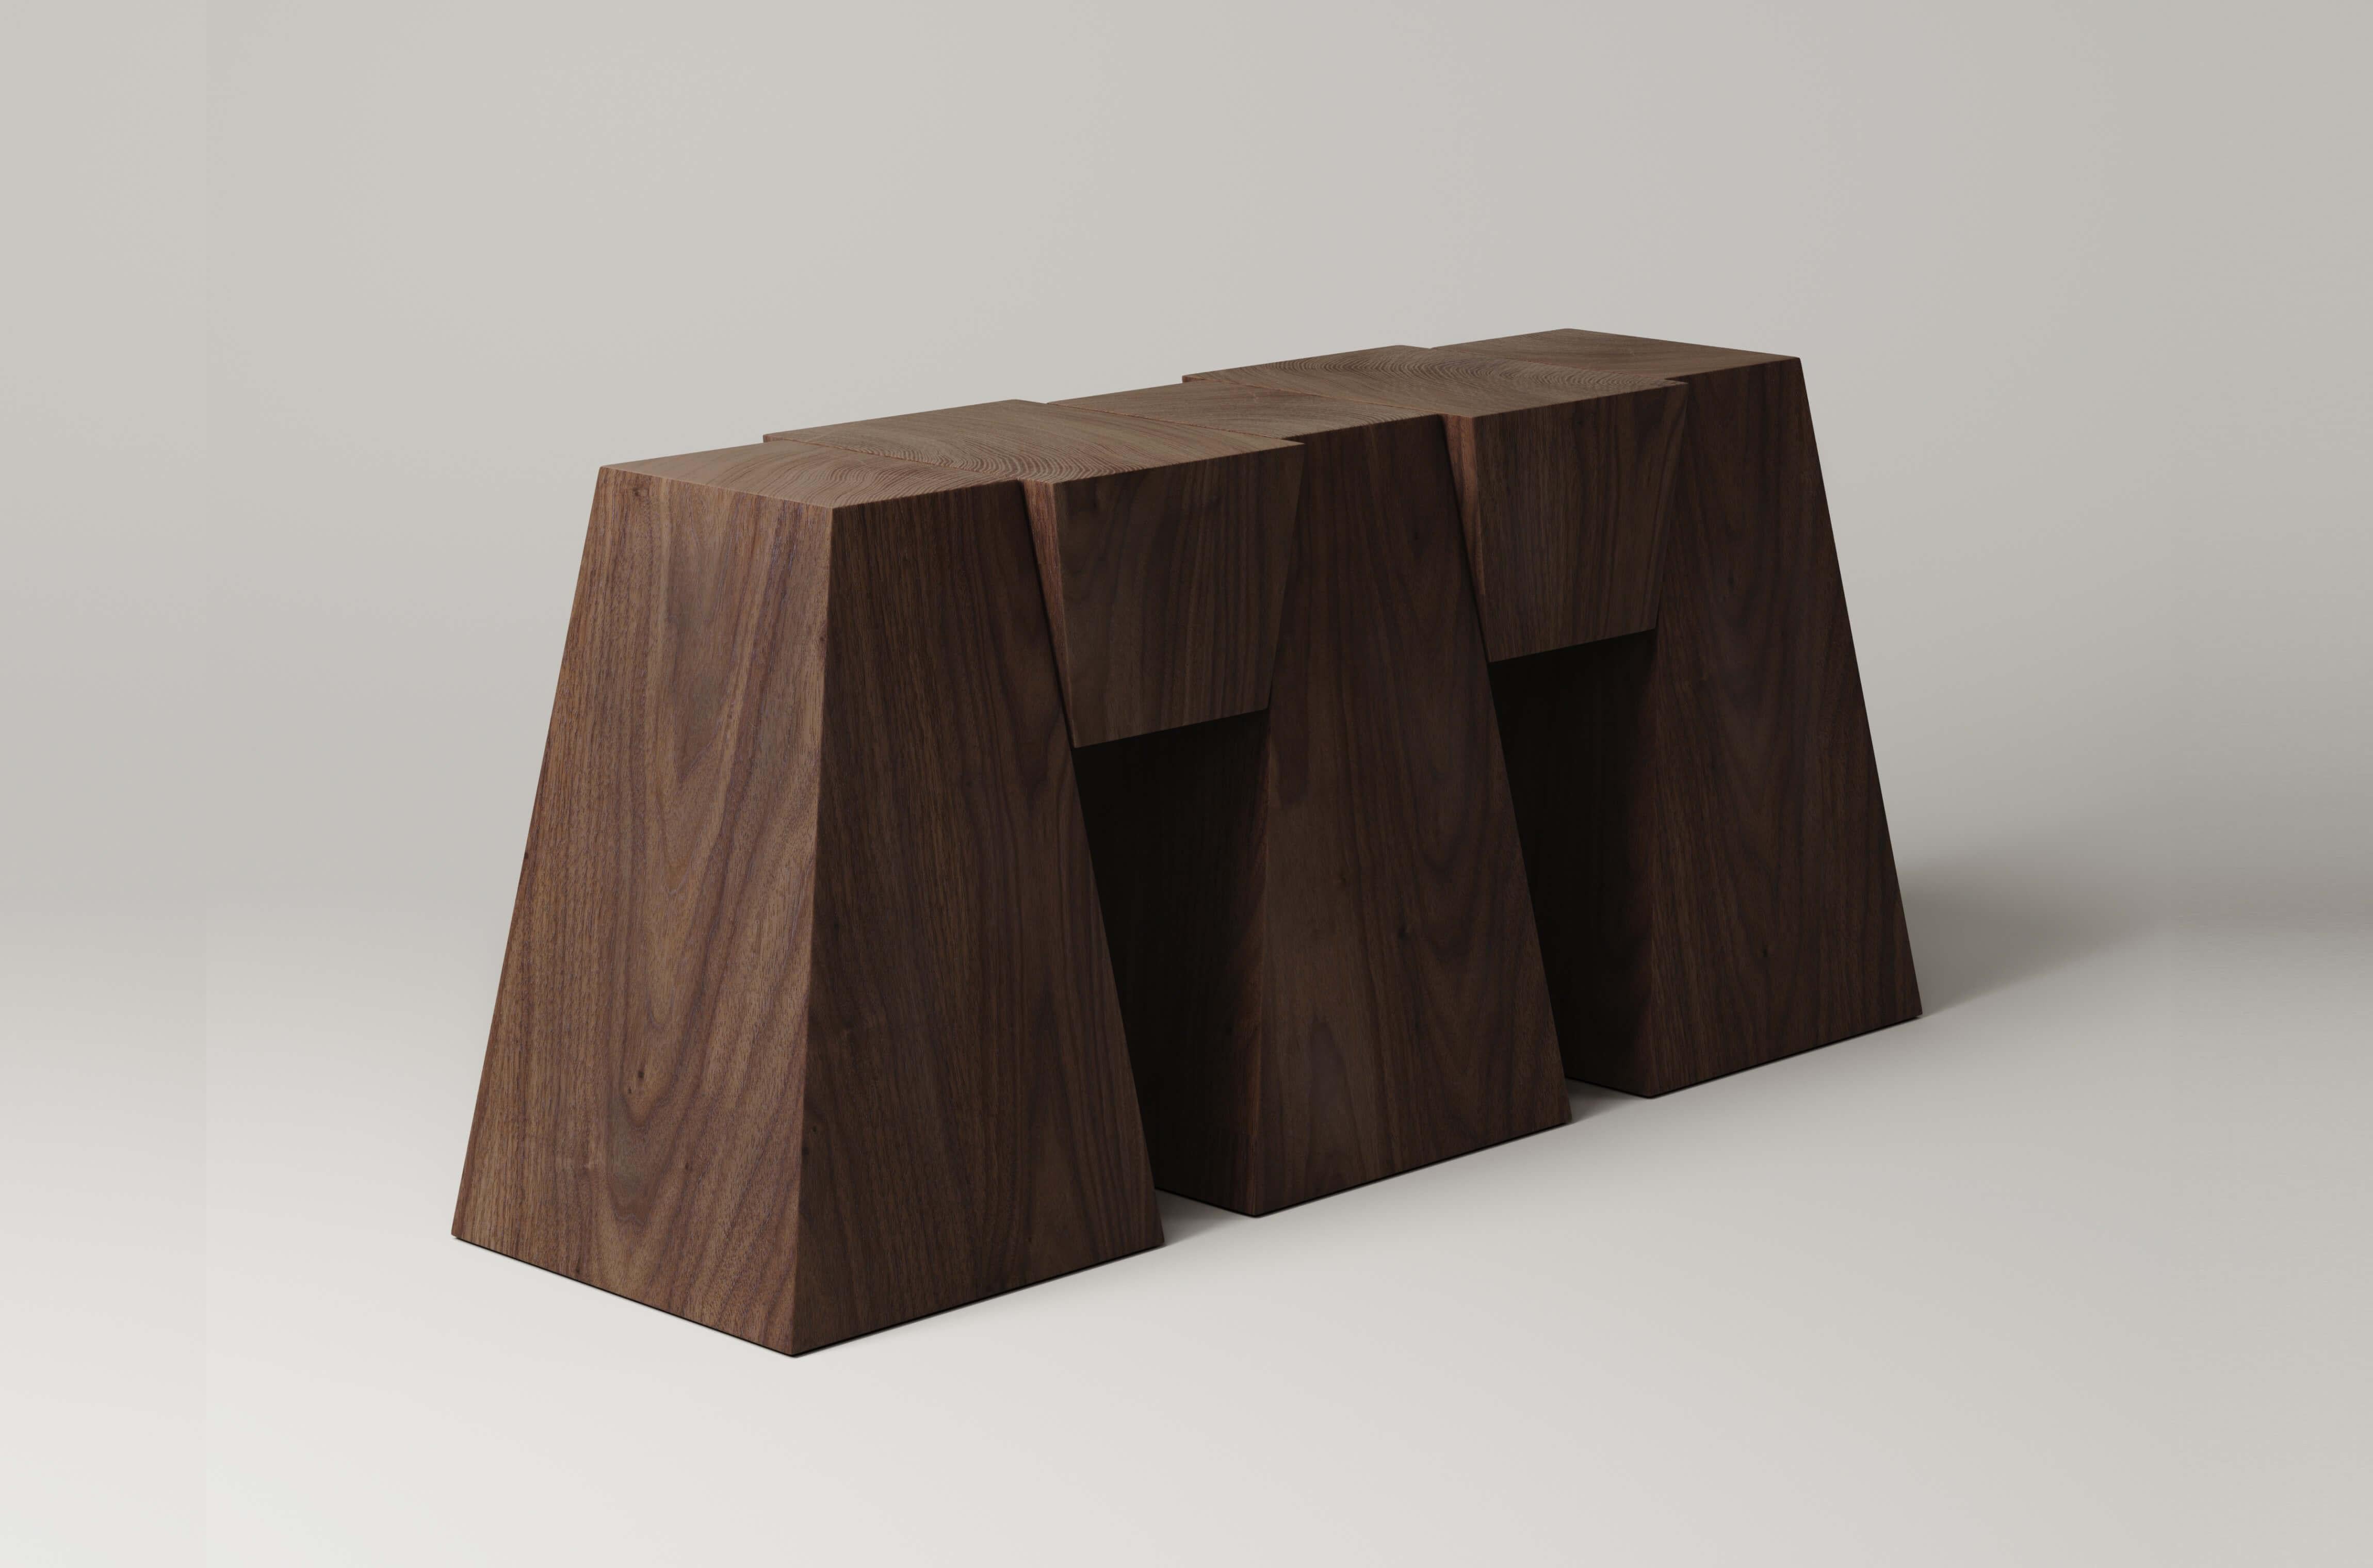 M_006 Walnut Console by Monolith Studio
Signed and Numbered.
Dimensions: D 45 x W 165 x H 78 cm.
Materials: Walnut.

Available in travertine, walnut, white oak and lava rock.  Please contact us. 

Monolith, founded in 2022 by Marc Personick, leans